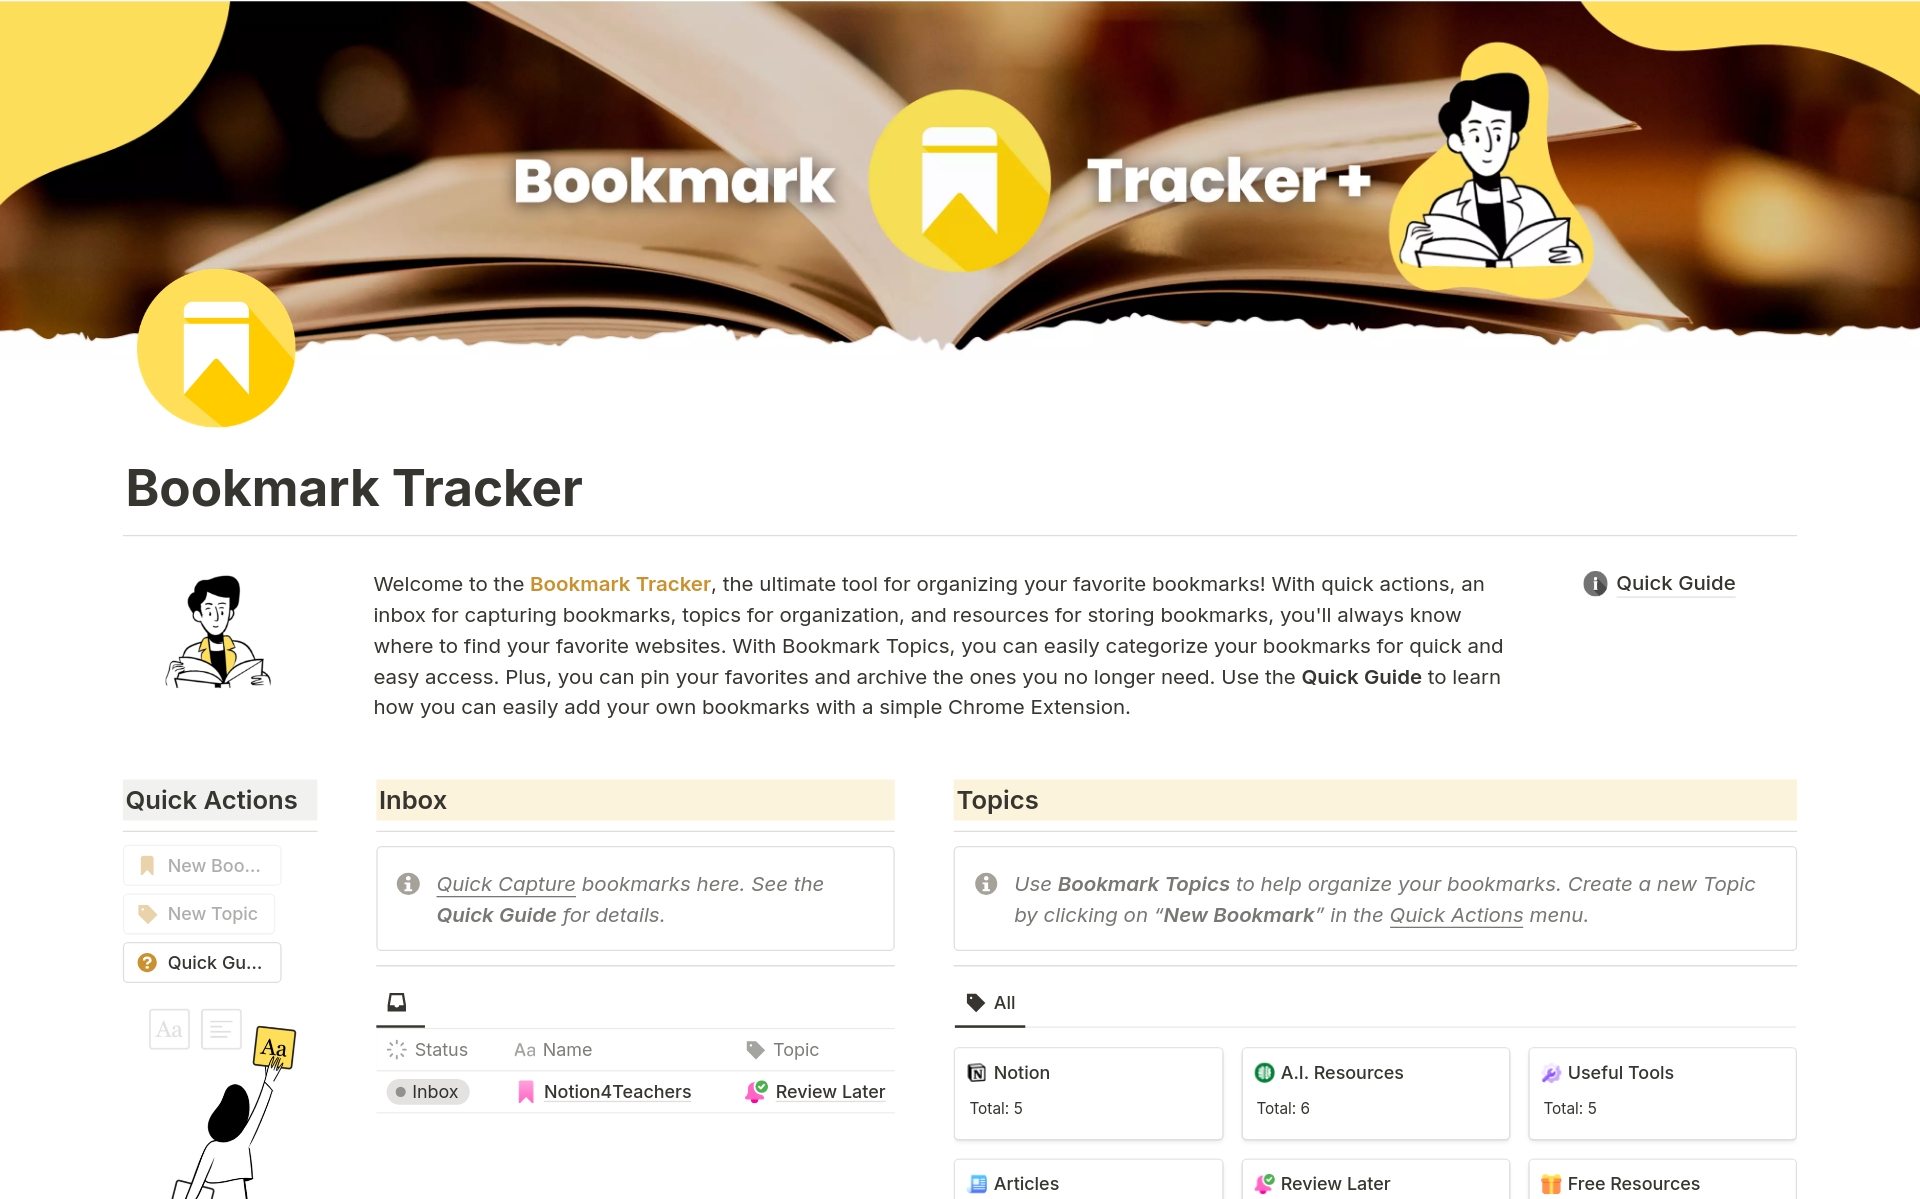 The Bookmark Tracker streamlines bookmark organization and access, empowering teachers to effortlessly categorize, capture, and store their favorite educational resources for efficient teaching.